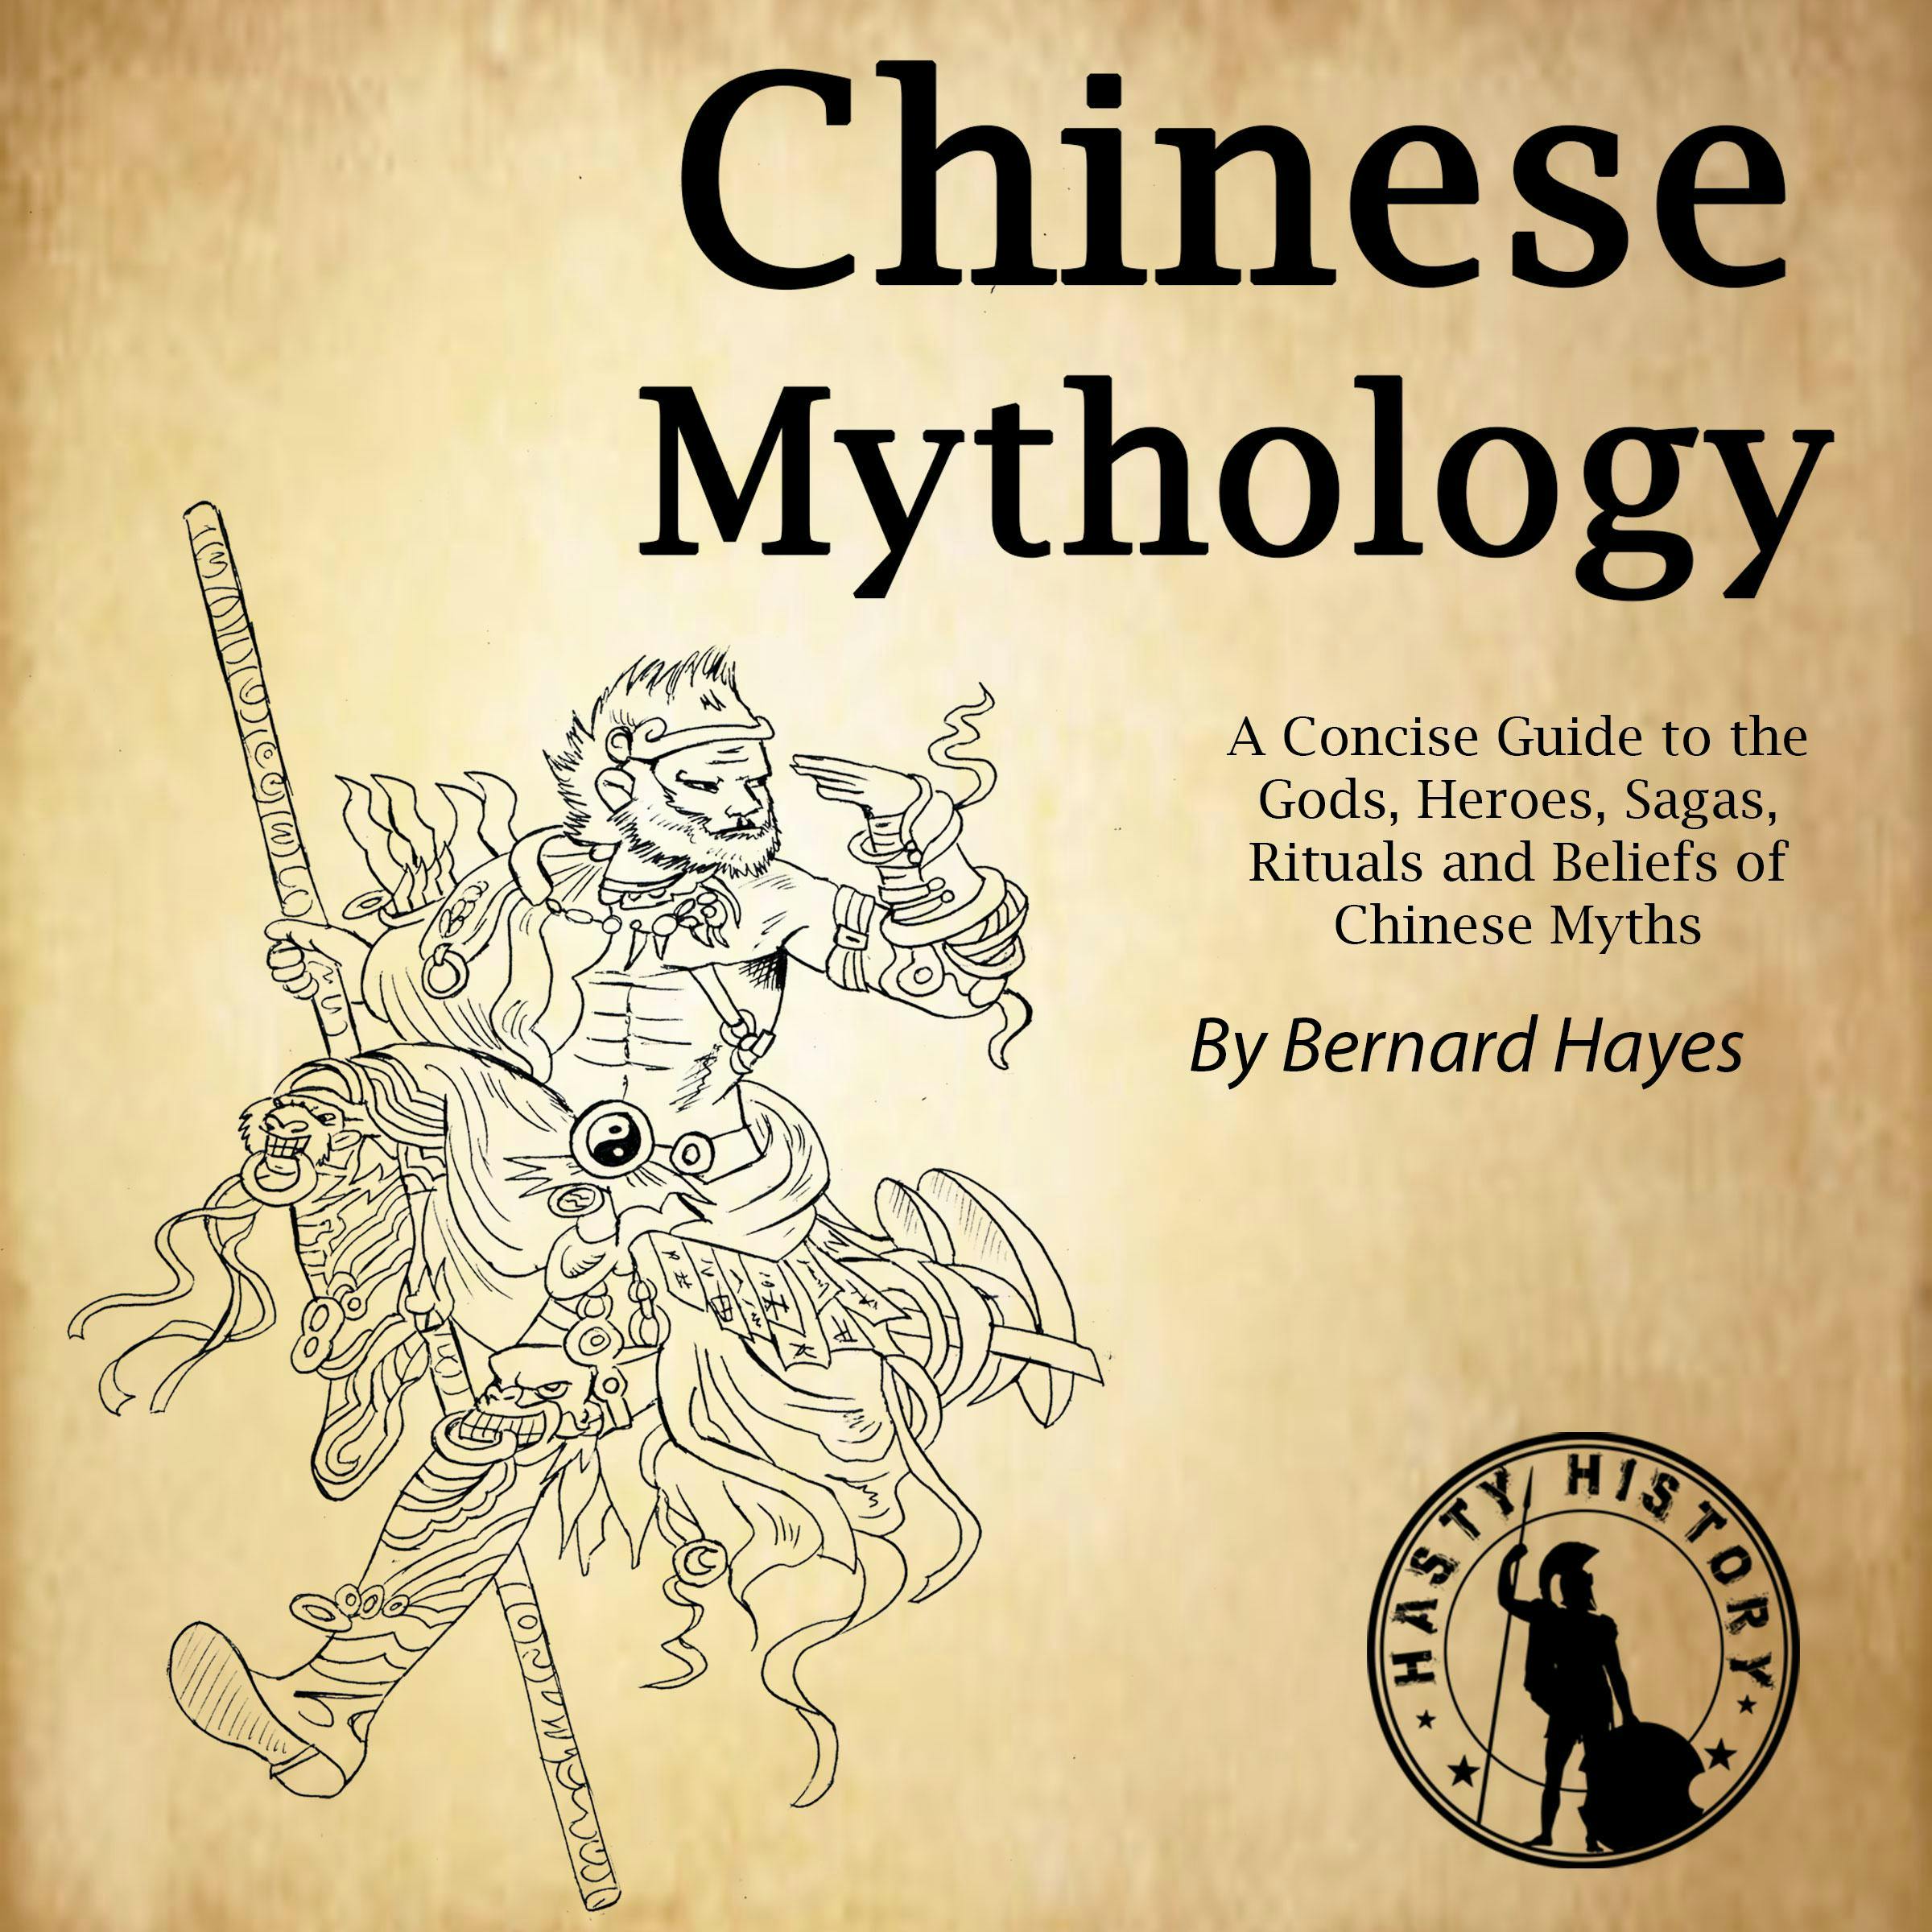 Chinese Mythology: A Concise Guide to the Gods, Heroes, Sagas, Rituals and Beliefs of Chinese Myths - Bernard Hayes